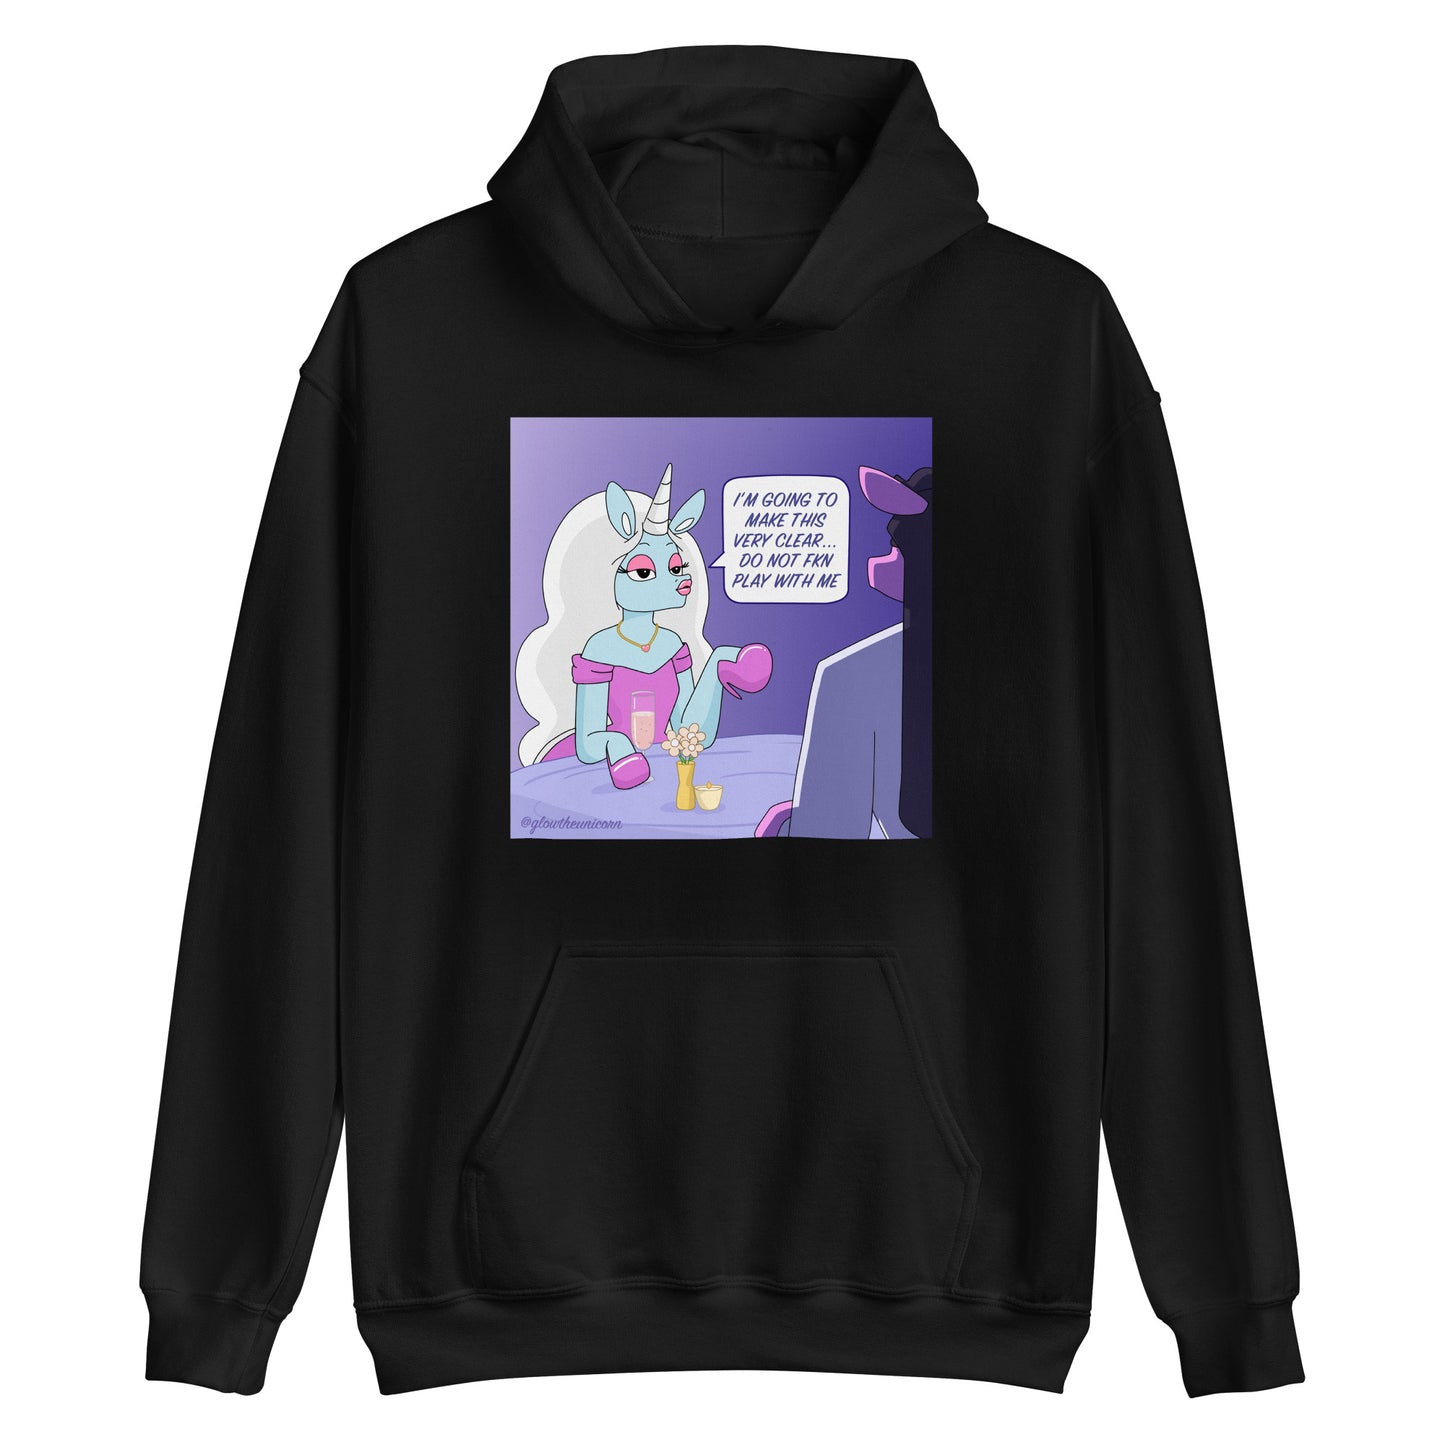 do not play with me black hoodie